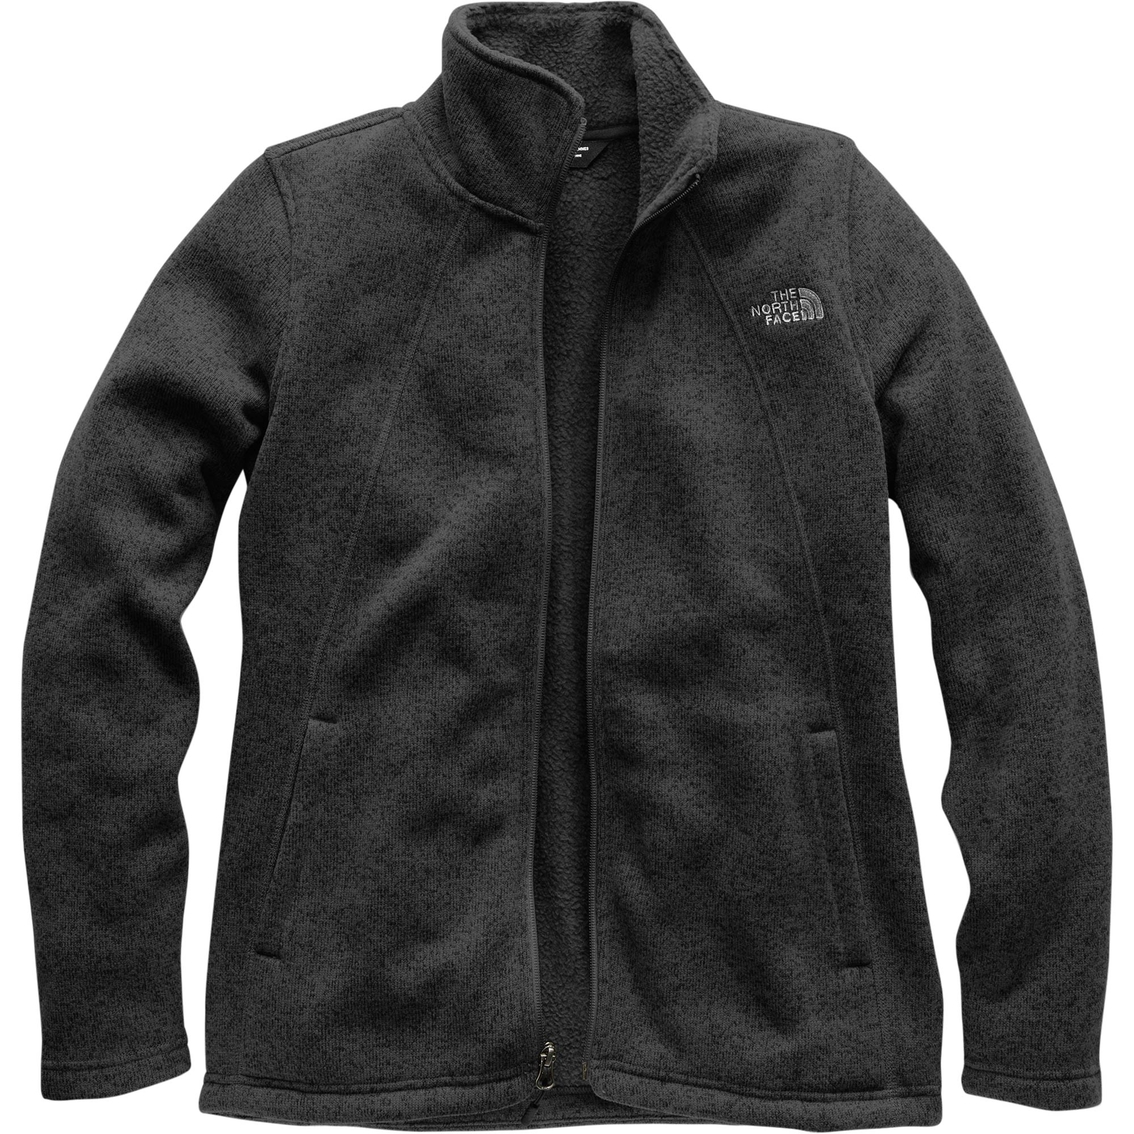 The North Face Crescent Full Zip Jacket | Jackets | Clothing ...